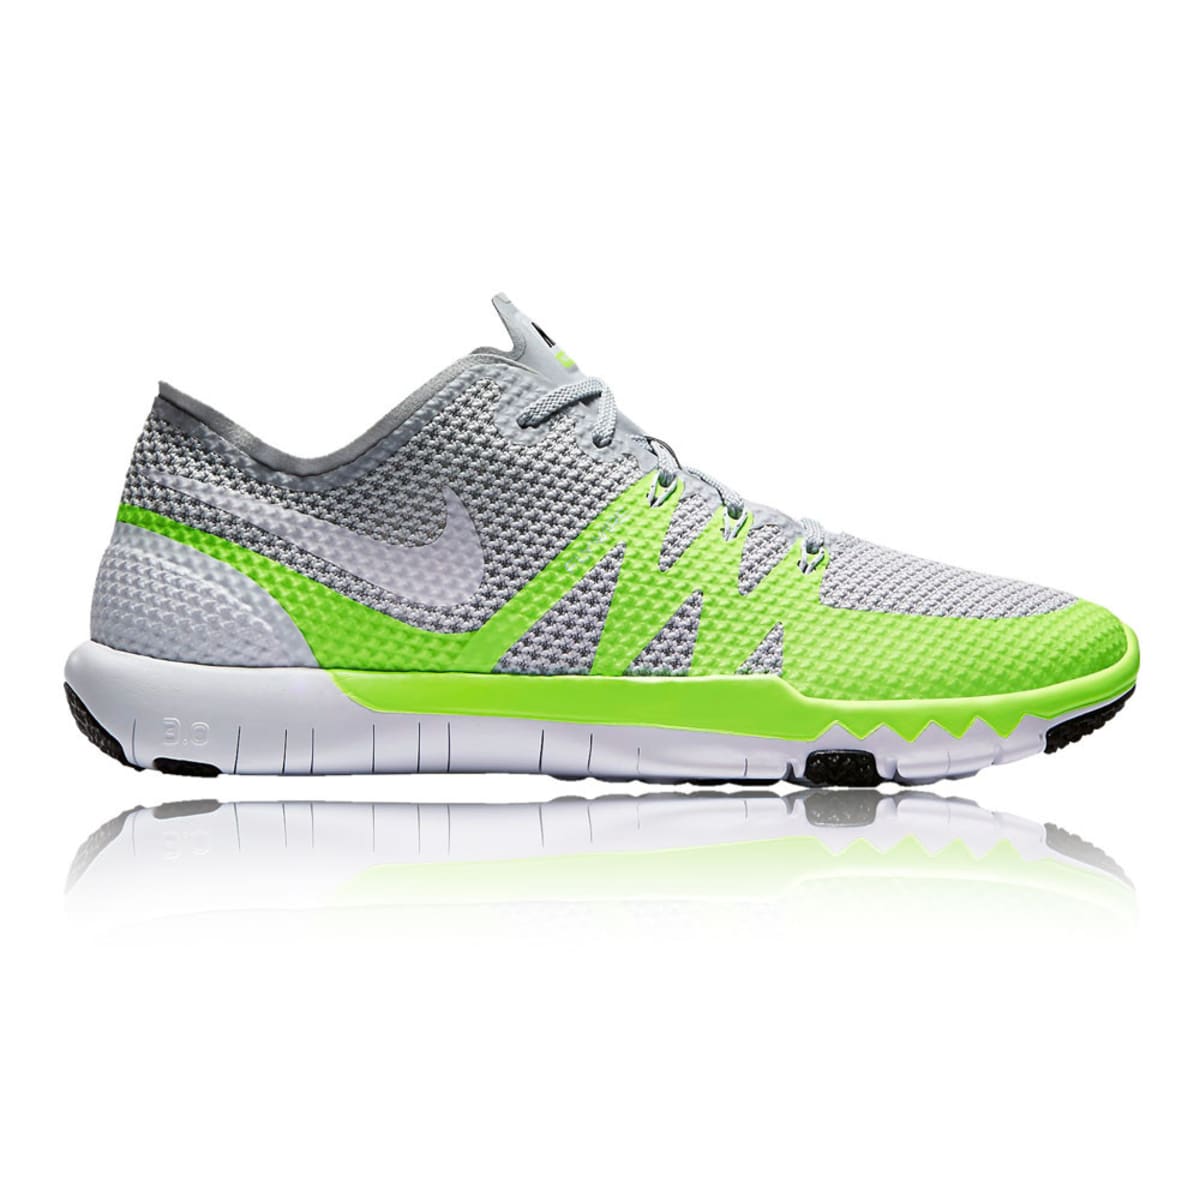 Nike Free Trainer 3.0 V3 | Collabs 